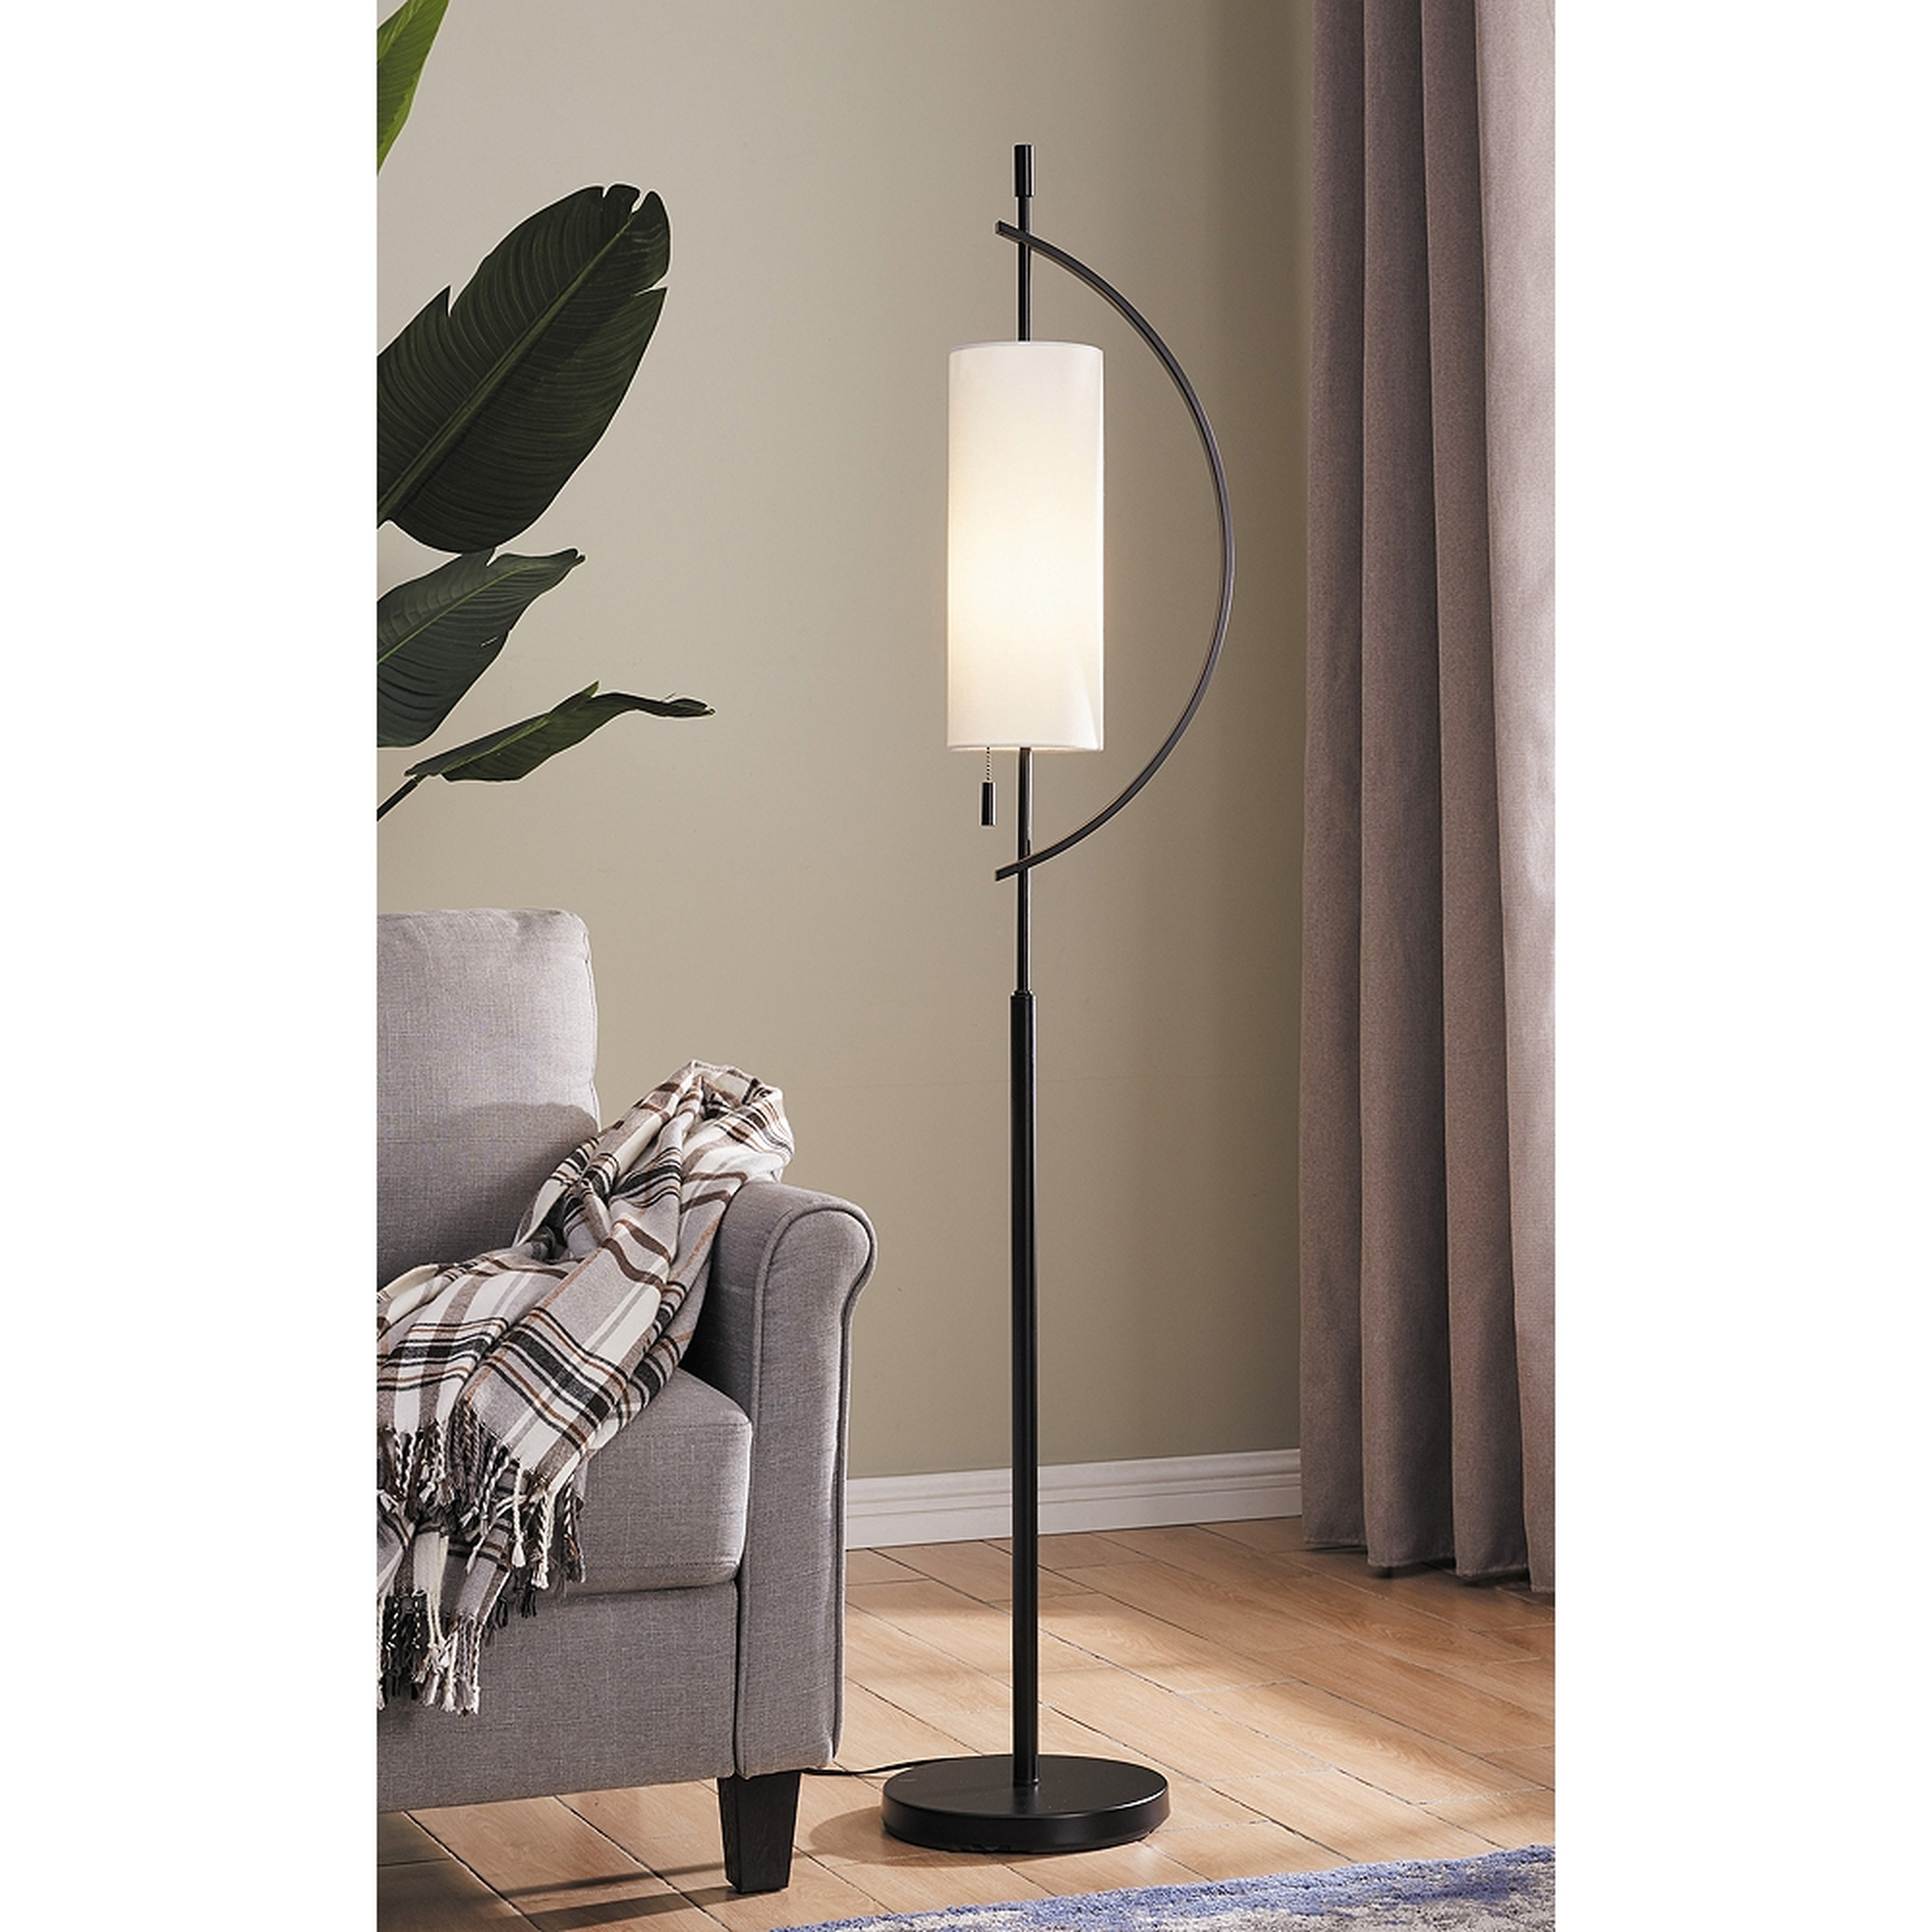 Lite Source Renessa Black and White Floor Lamp - Style # 87W39 - Lamps Plus